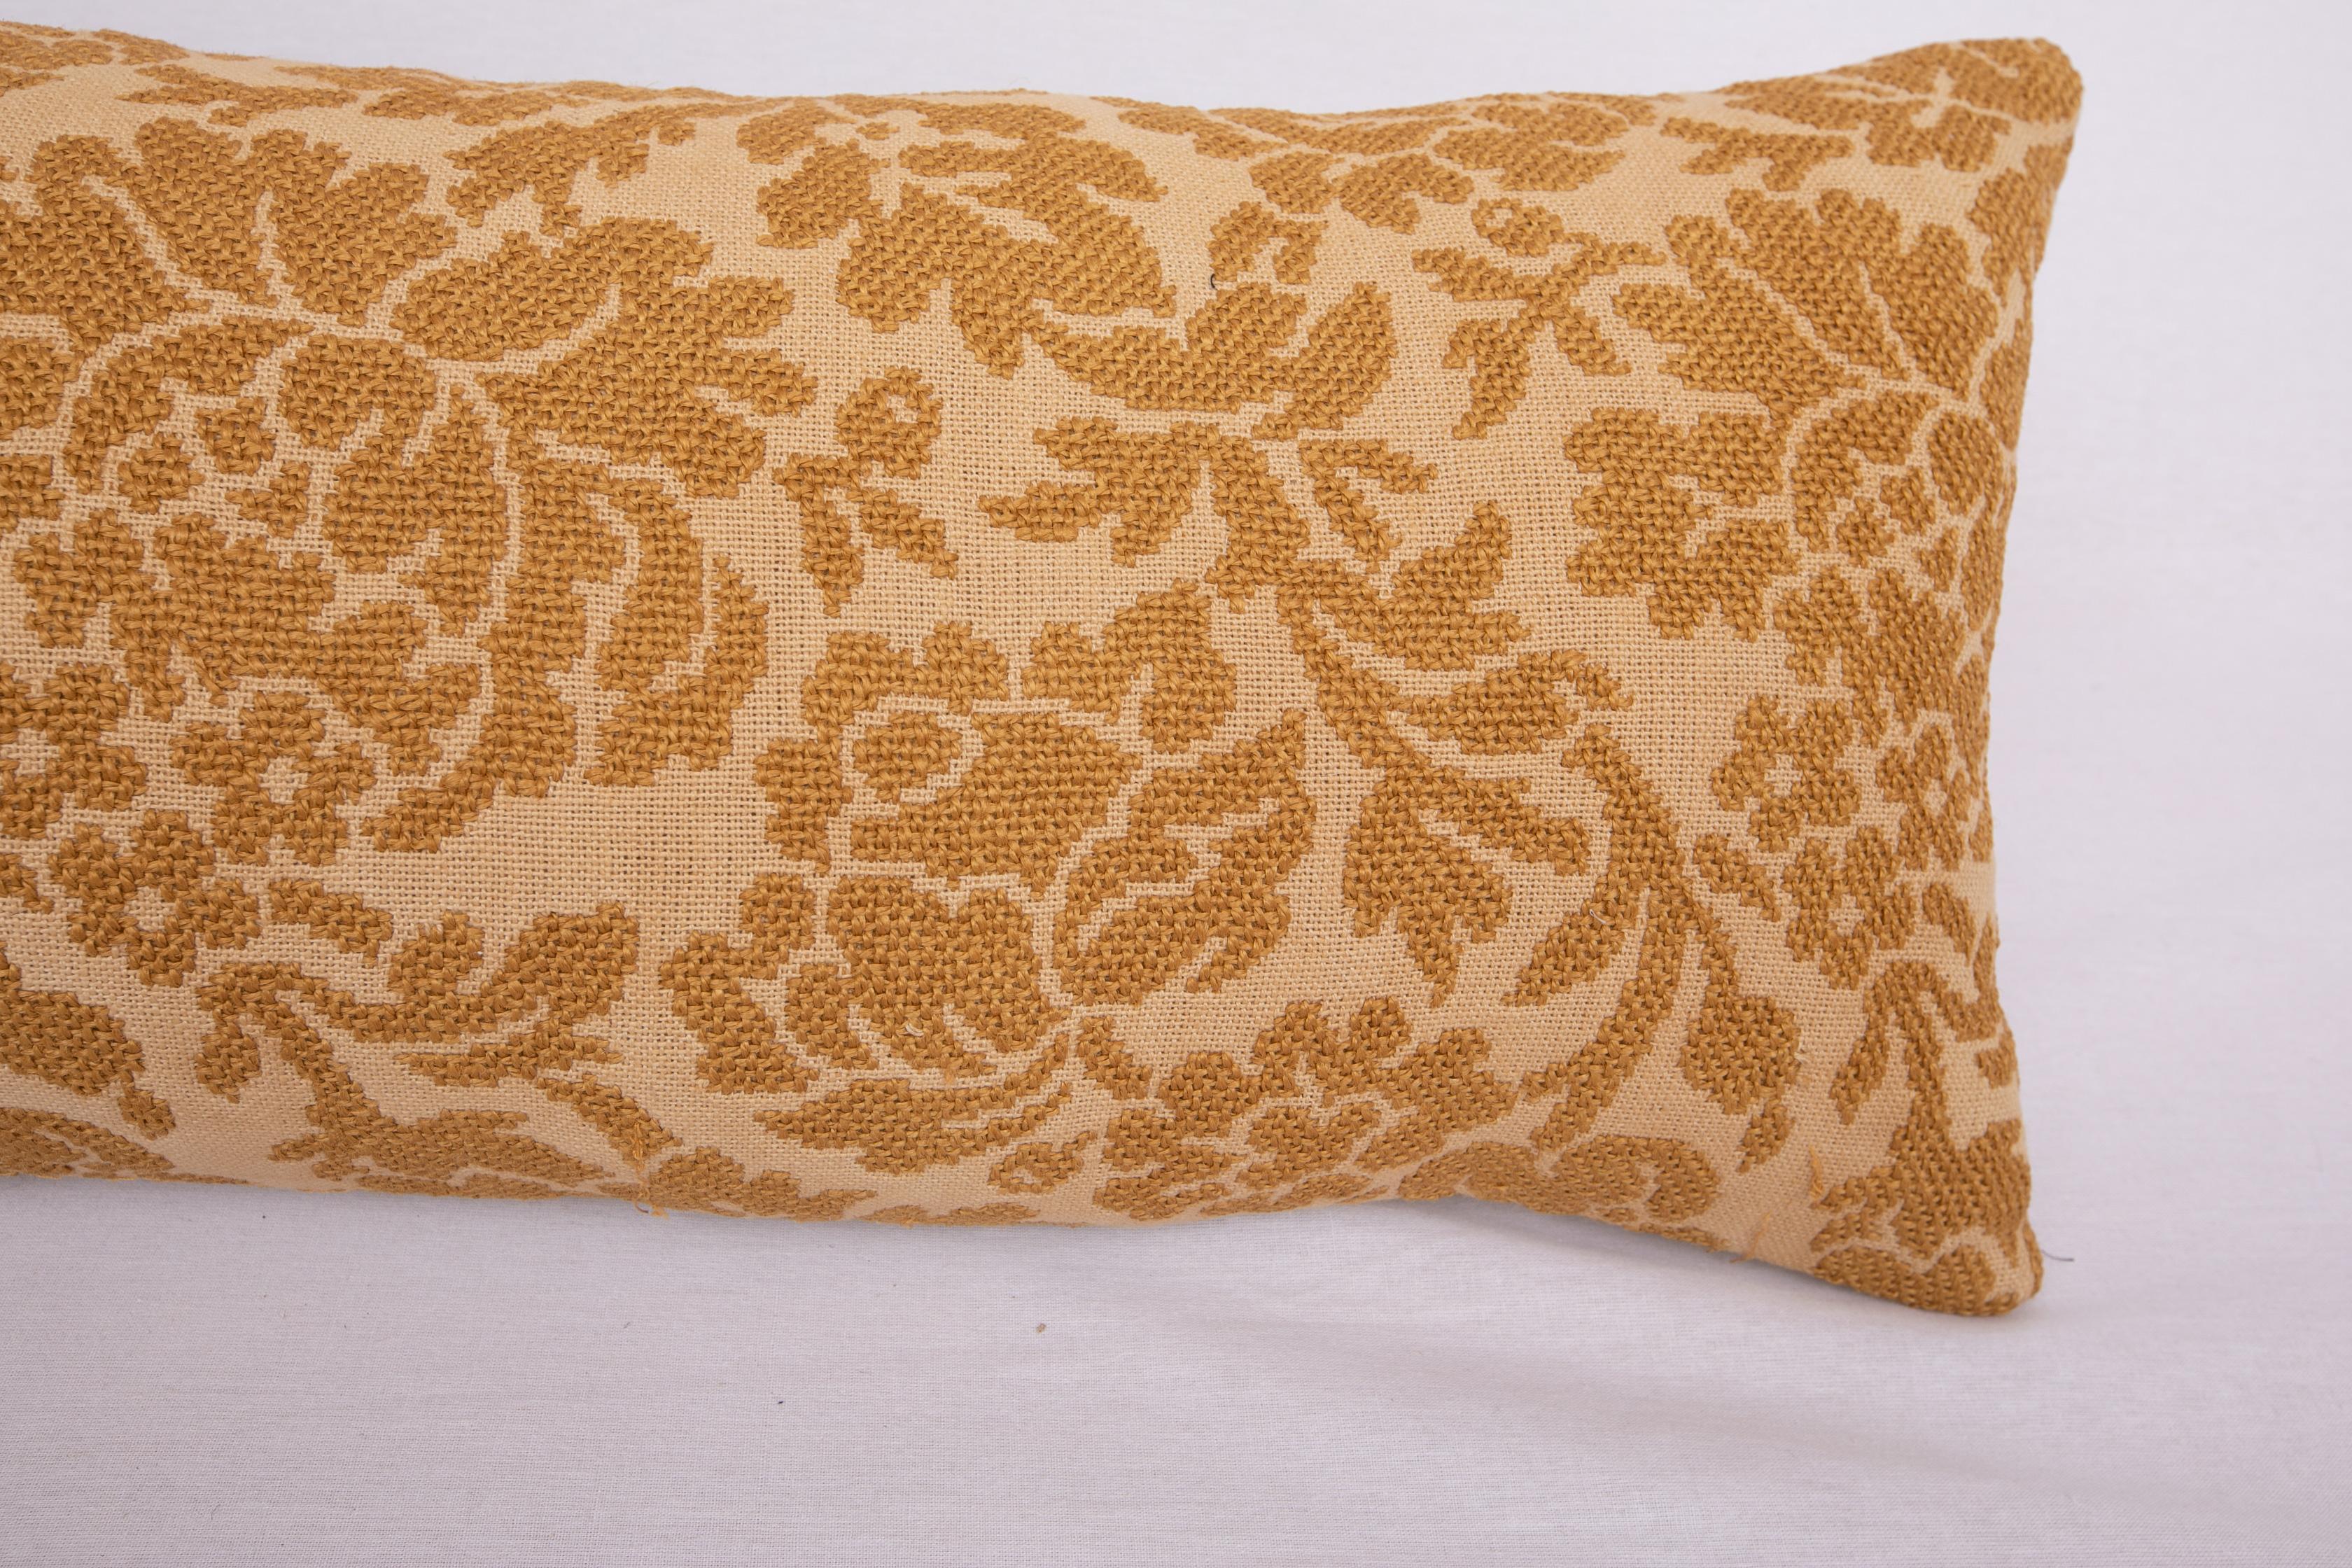 Embroidered Antique Pillowcase Made from an Early 20th C. European Embroidery For Sale